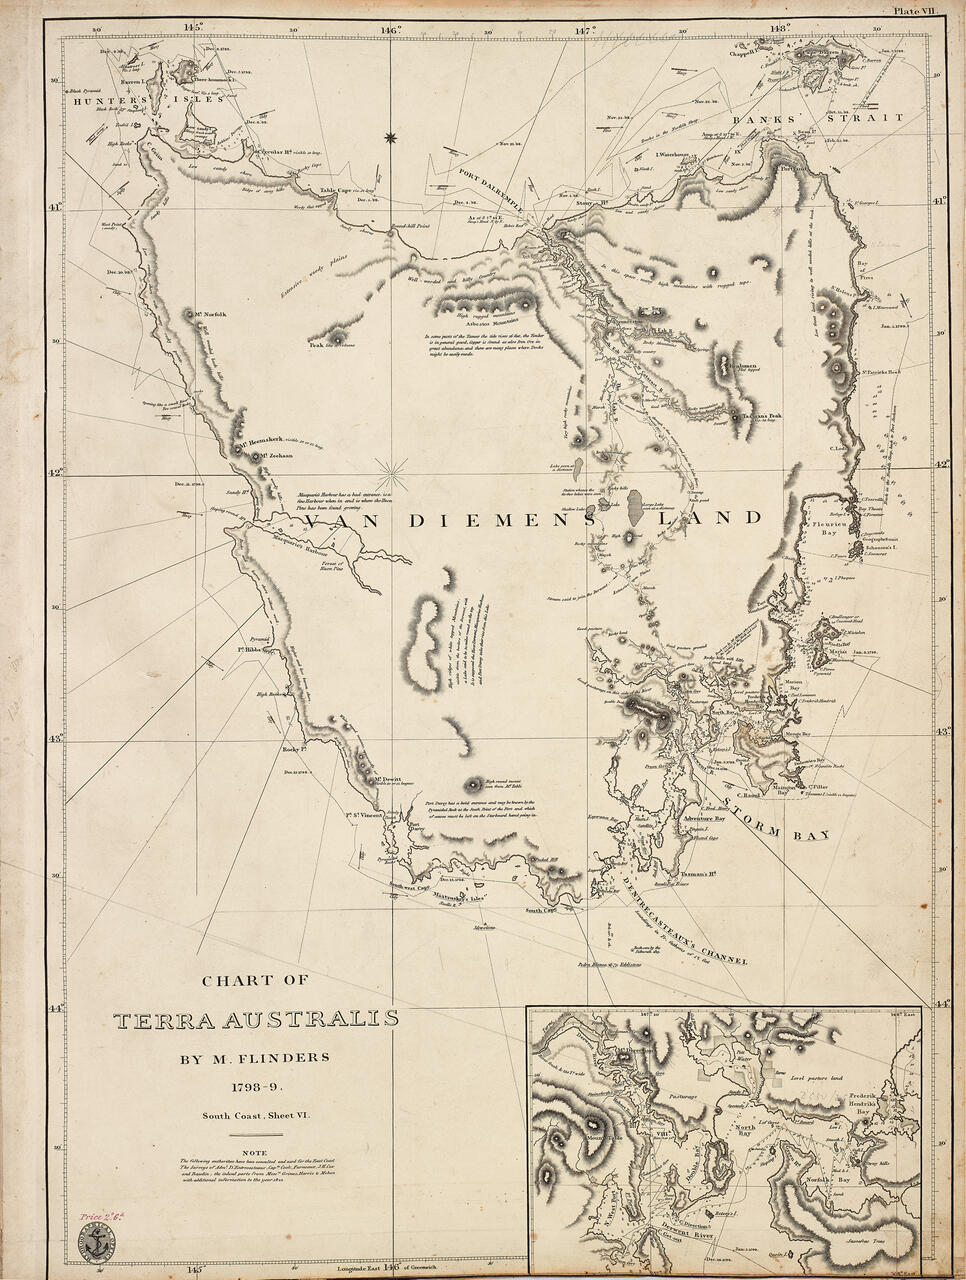 Map showing the island of Tasmania, printed in black ink on cream paper.  